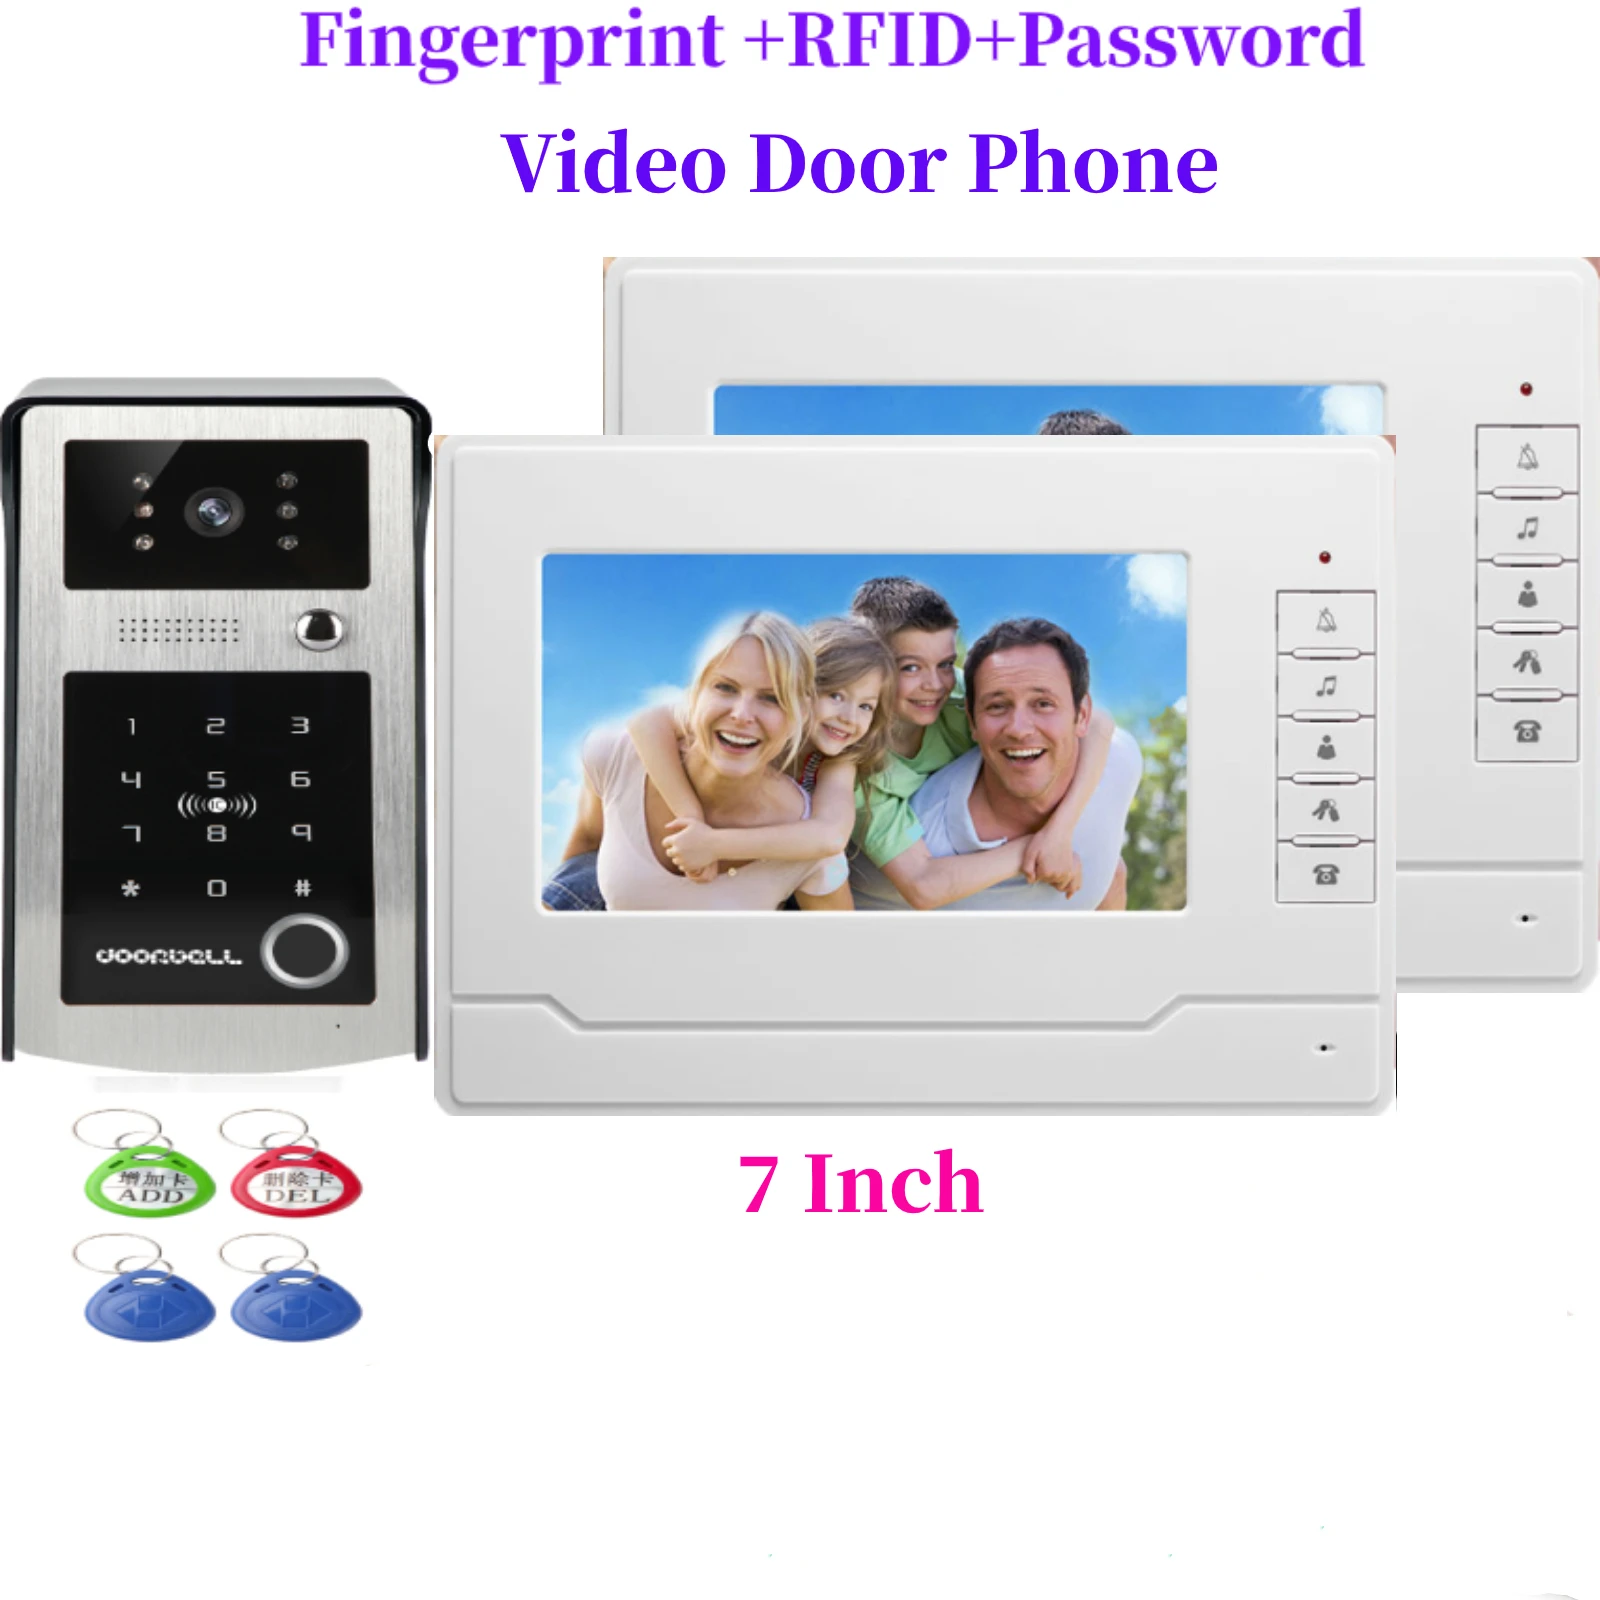 7inch Video Door Entry Security Intercom with Fingerprint password RIFD card network cable connection for 2 Families